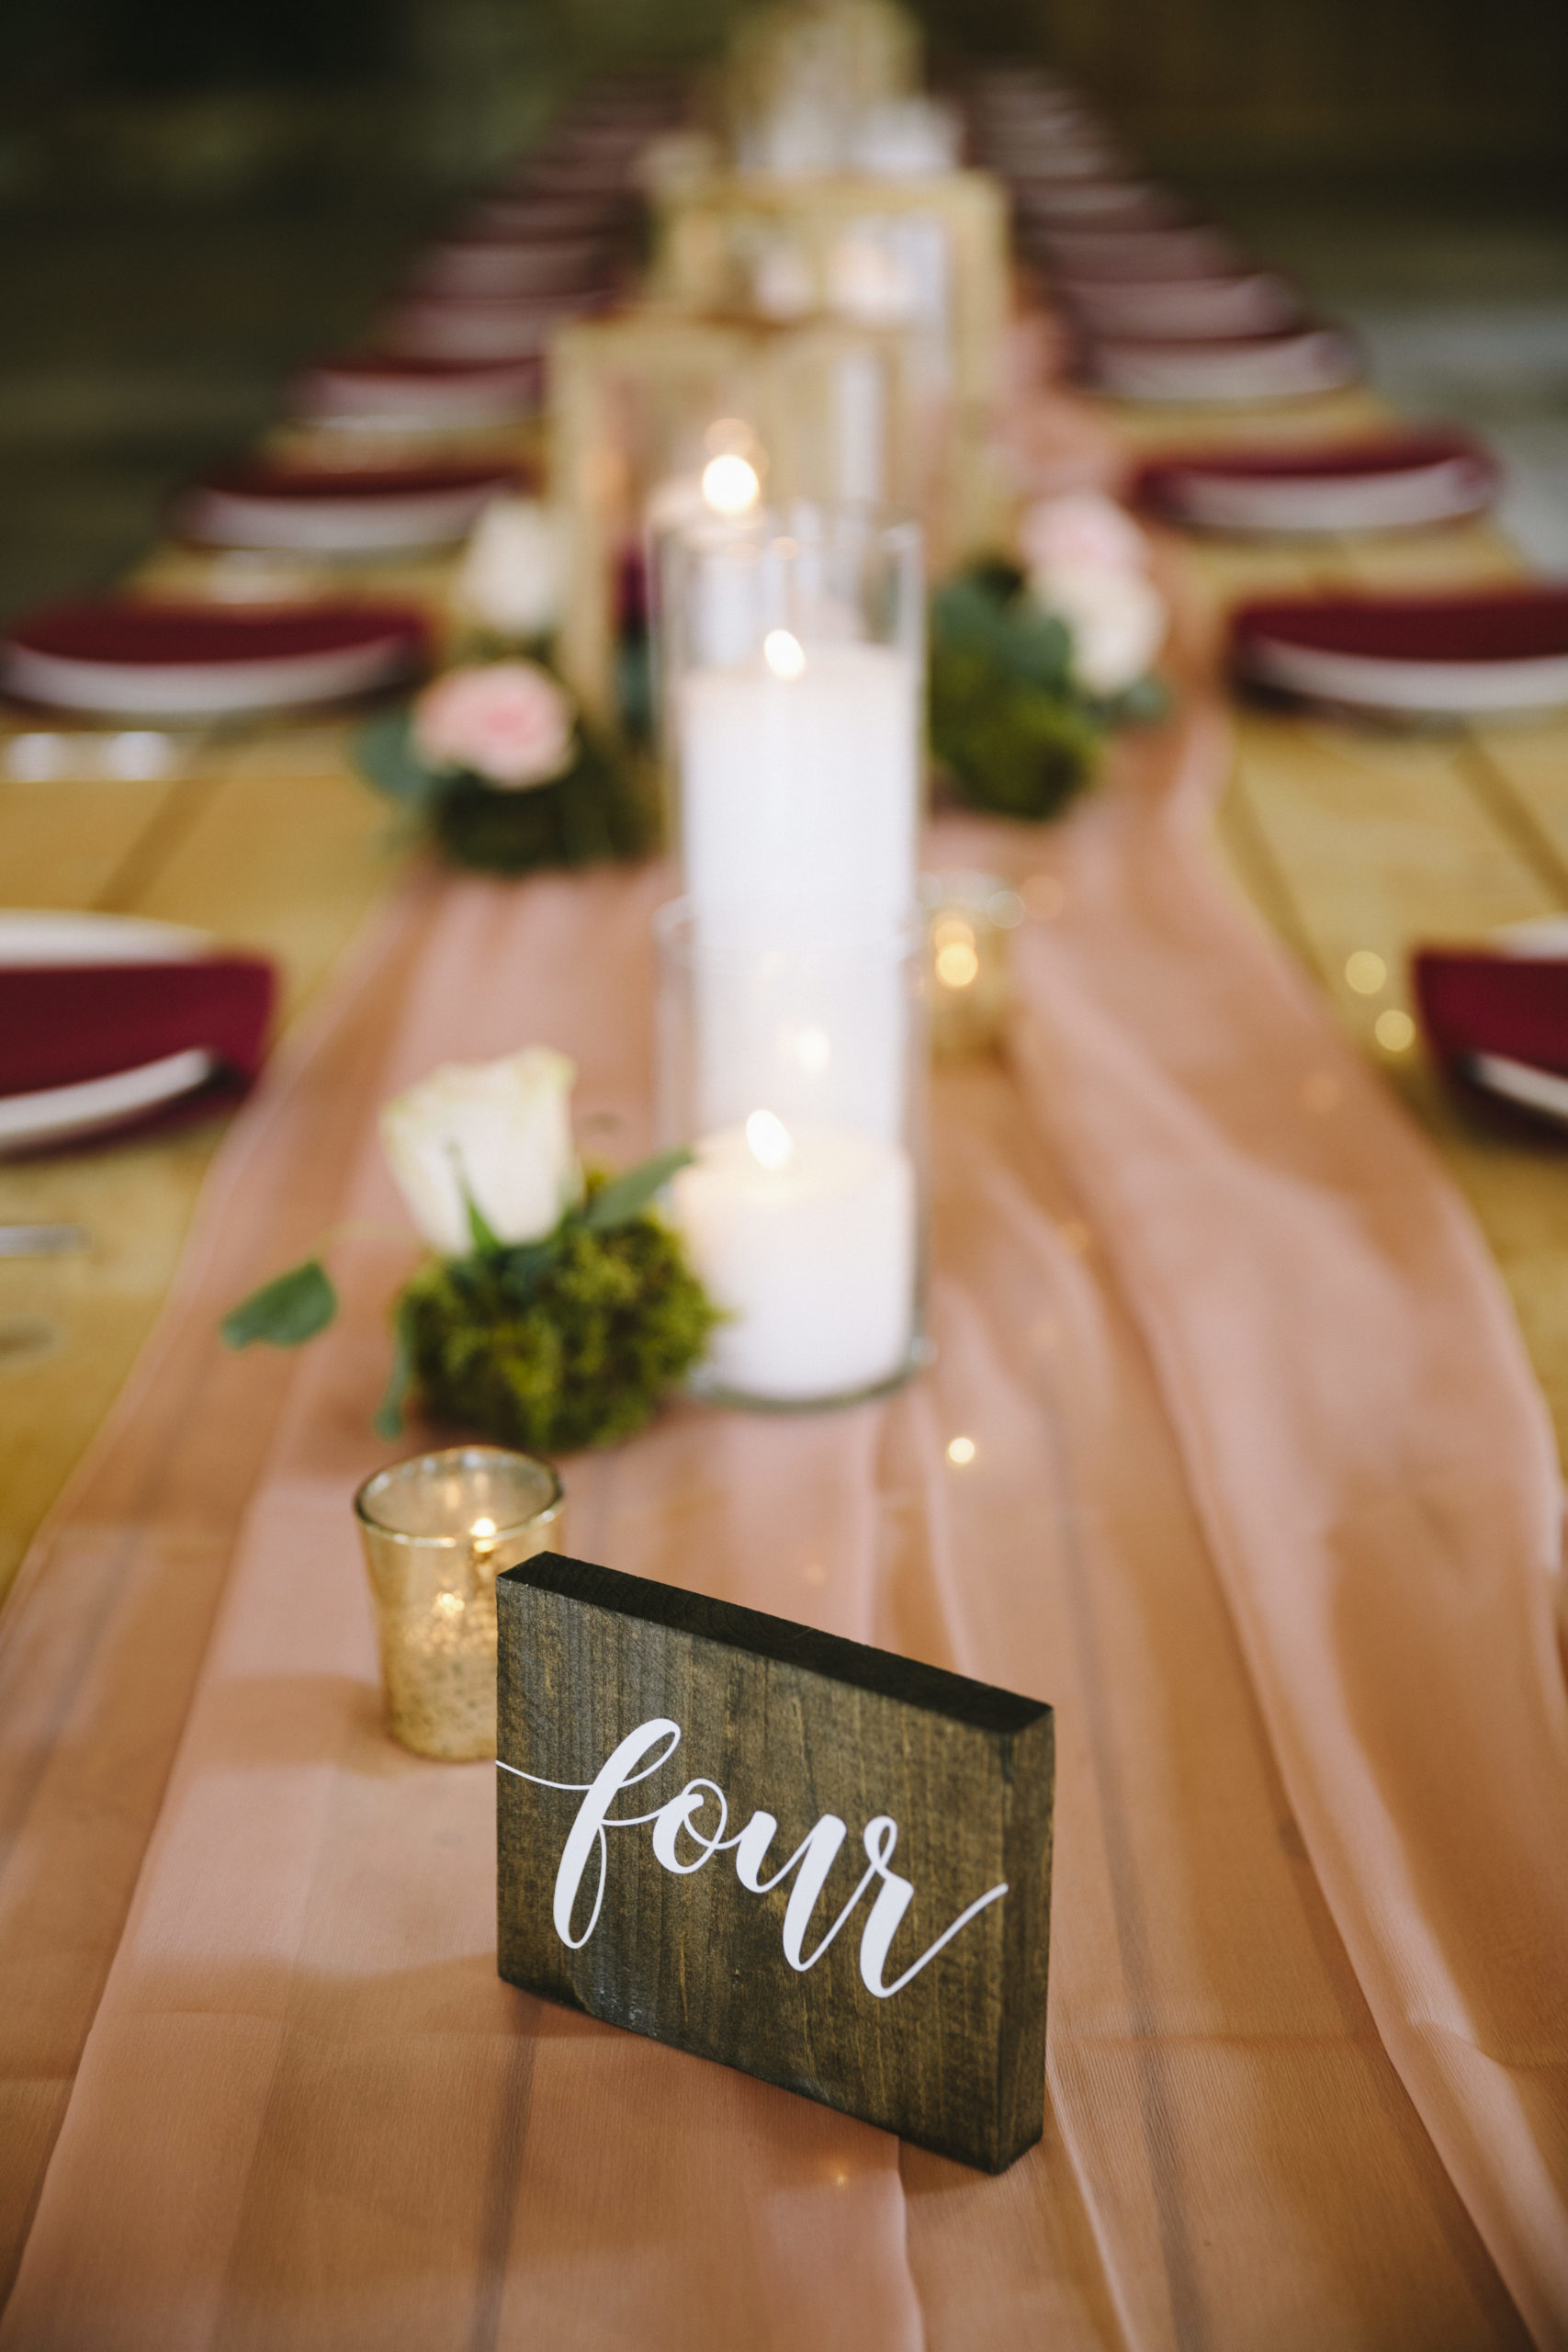 Table wedding number